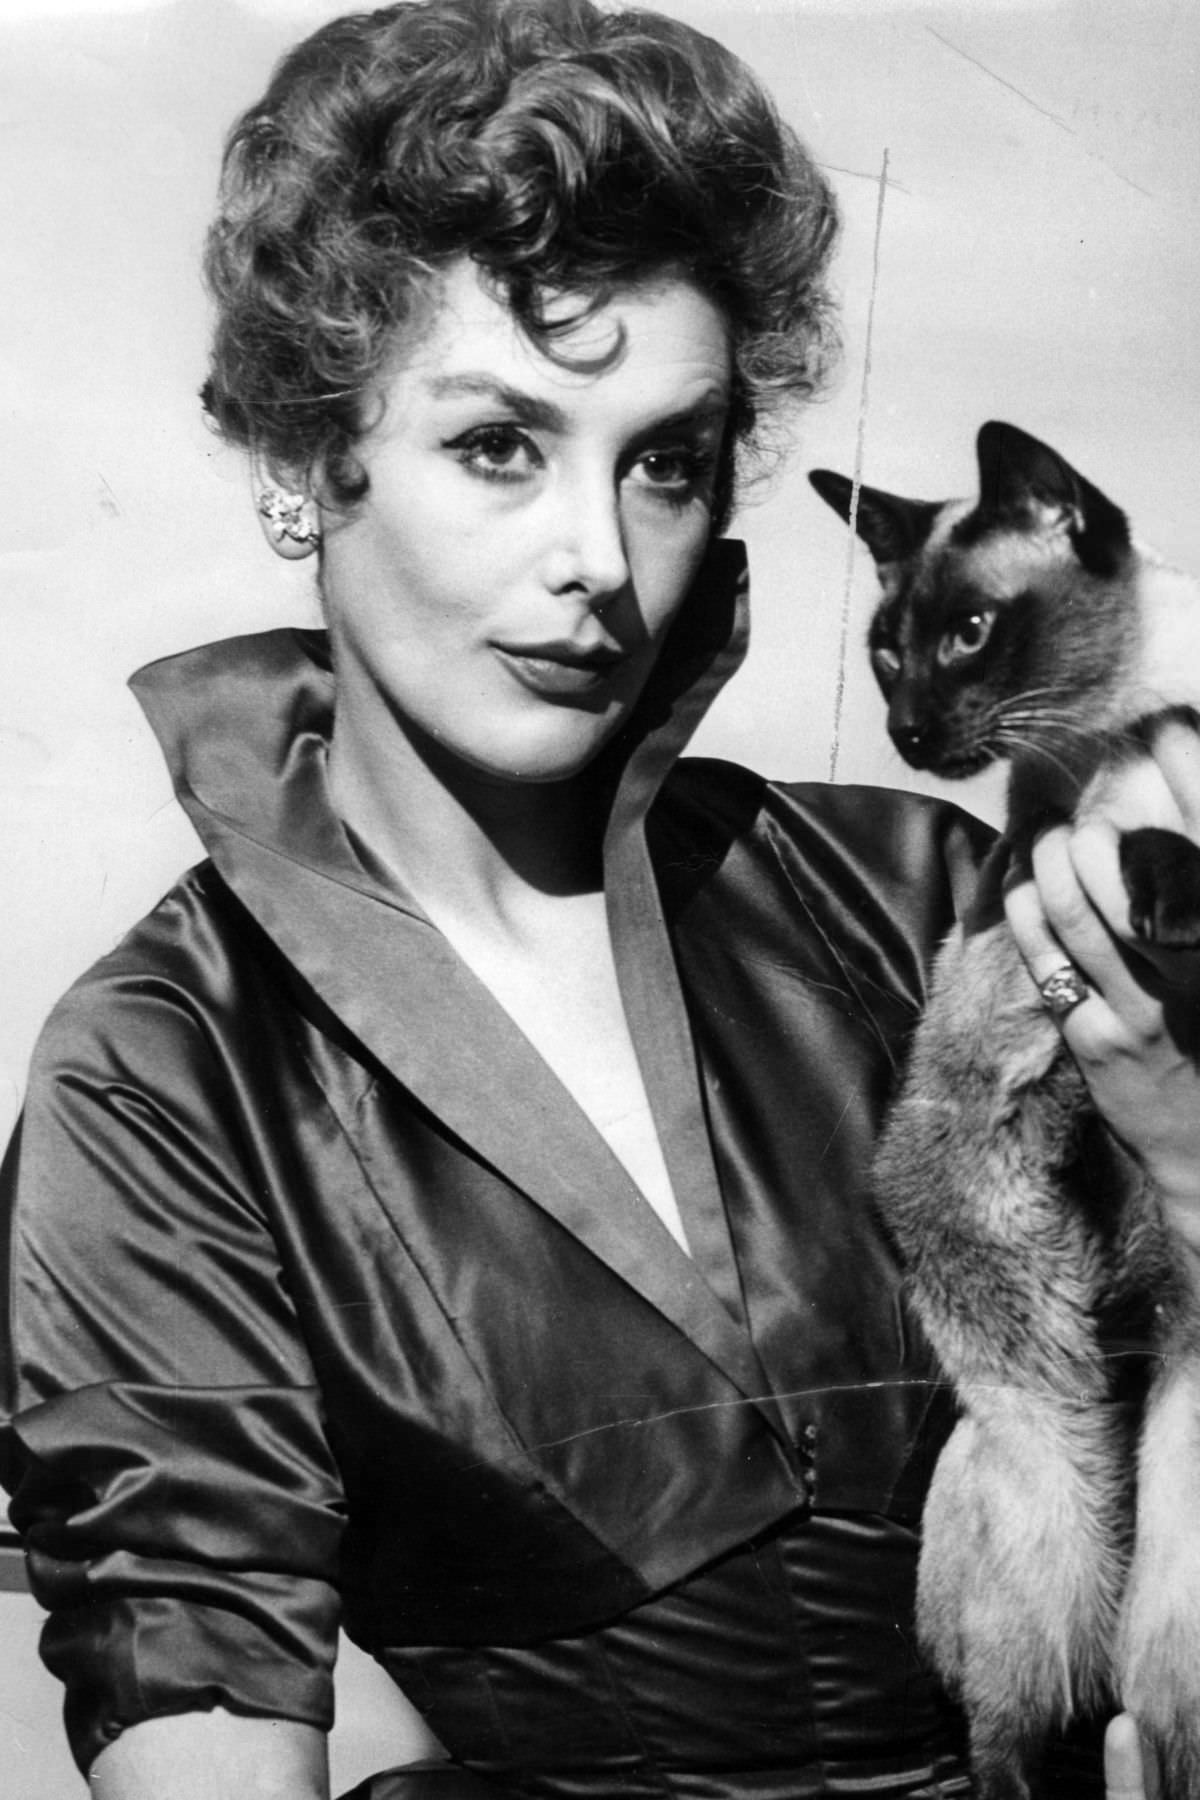 Actress Kay Kendall’s with her cat, 1958.